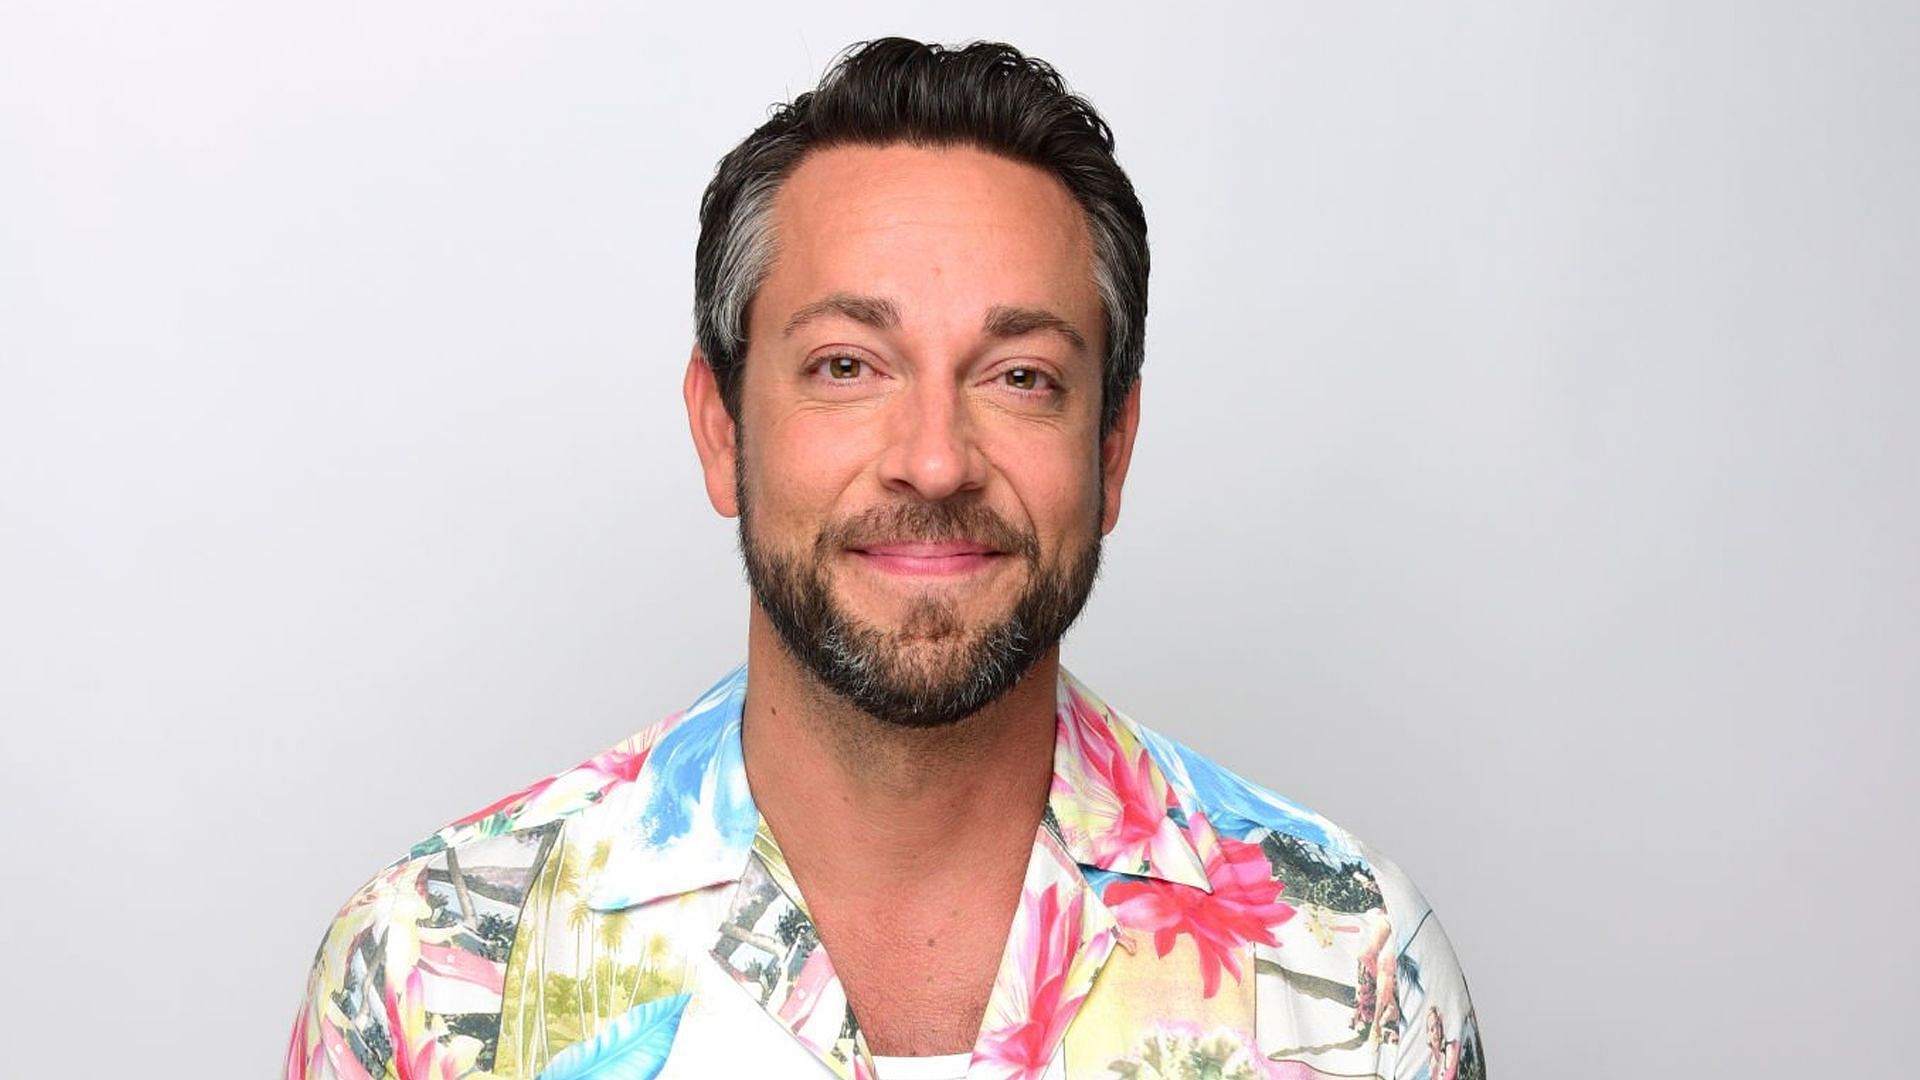 Zachary Levi under fire after seemingly anti-vax tweet (Image via Getty Images)